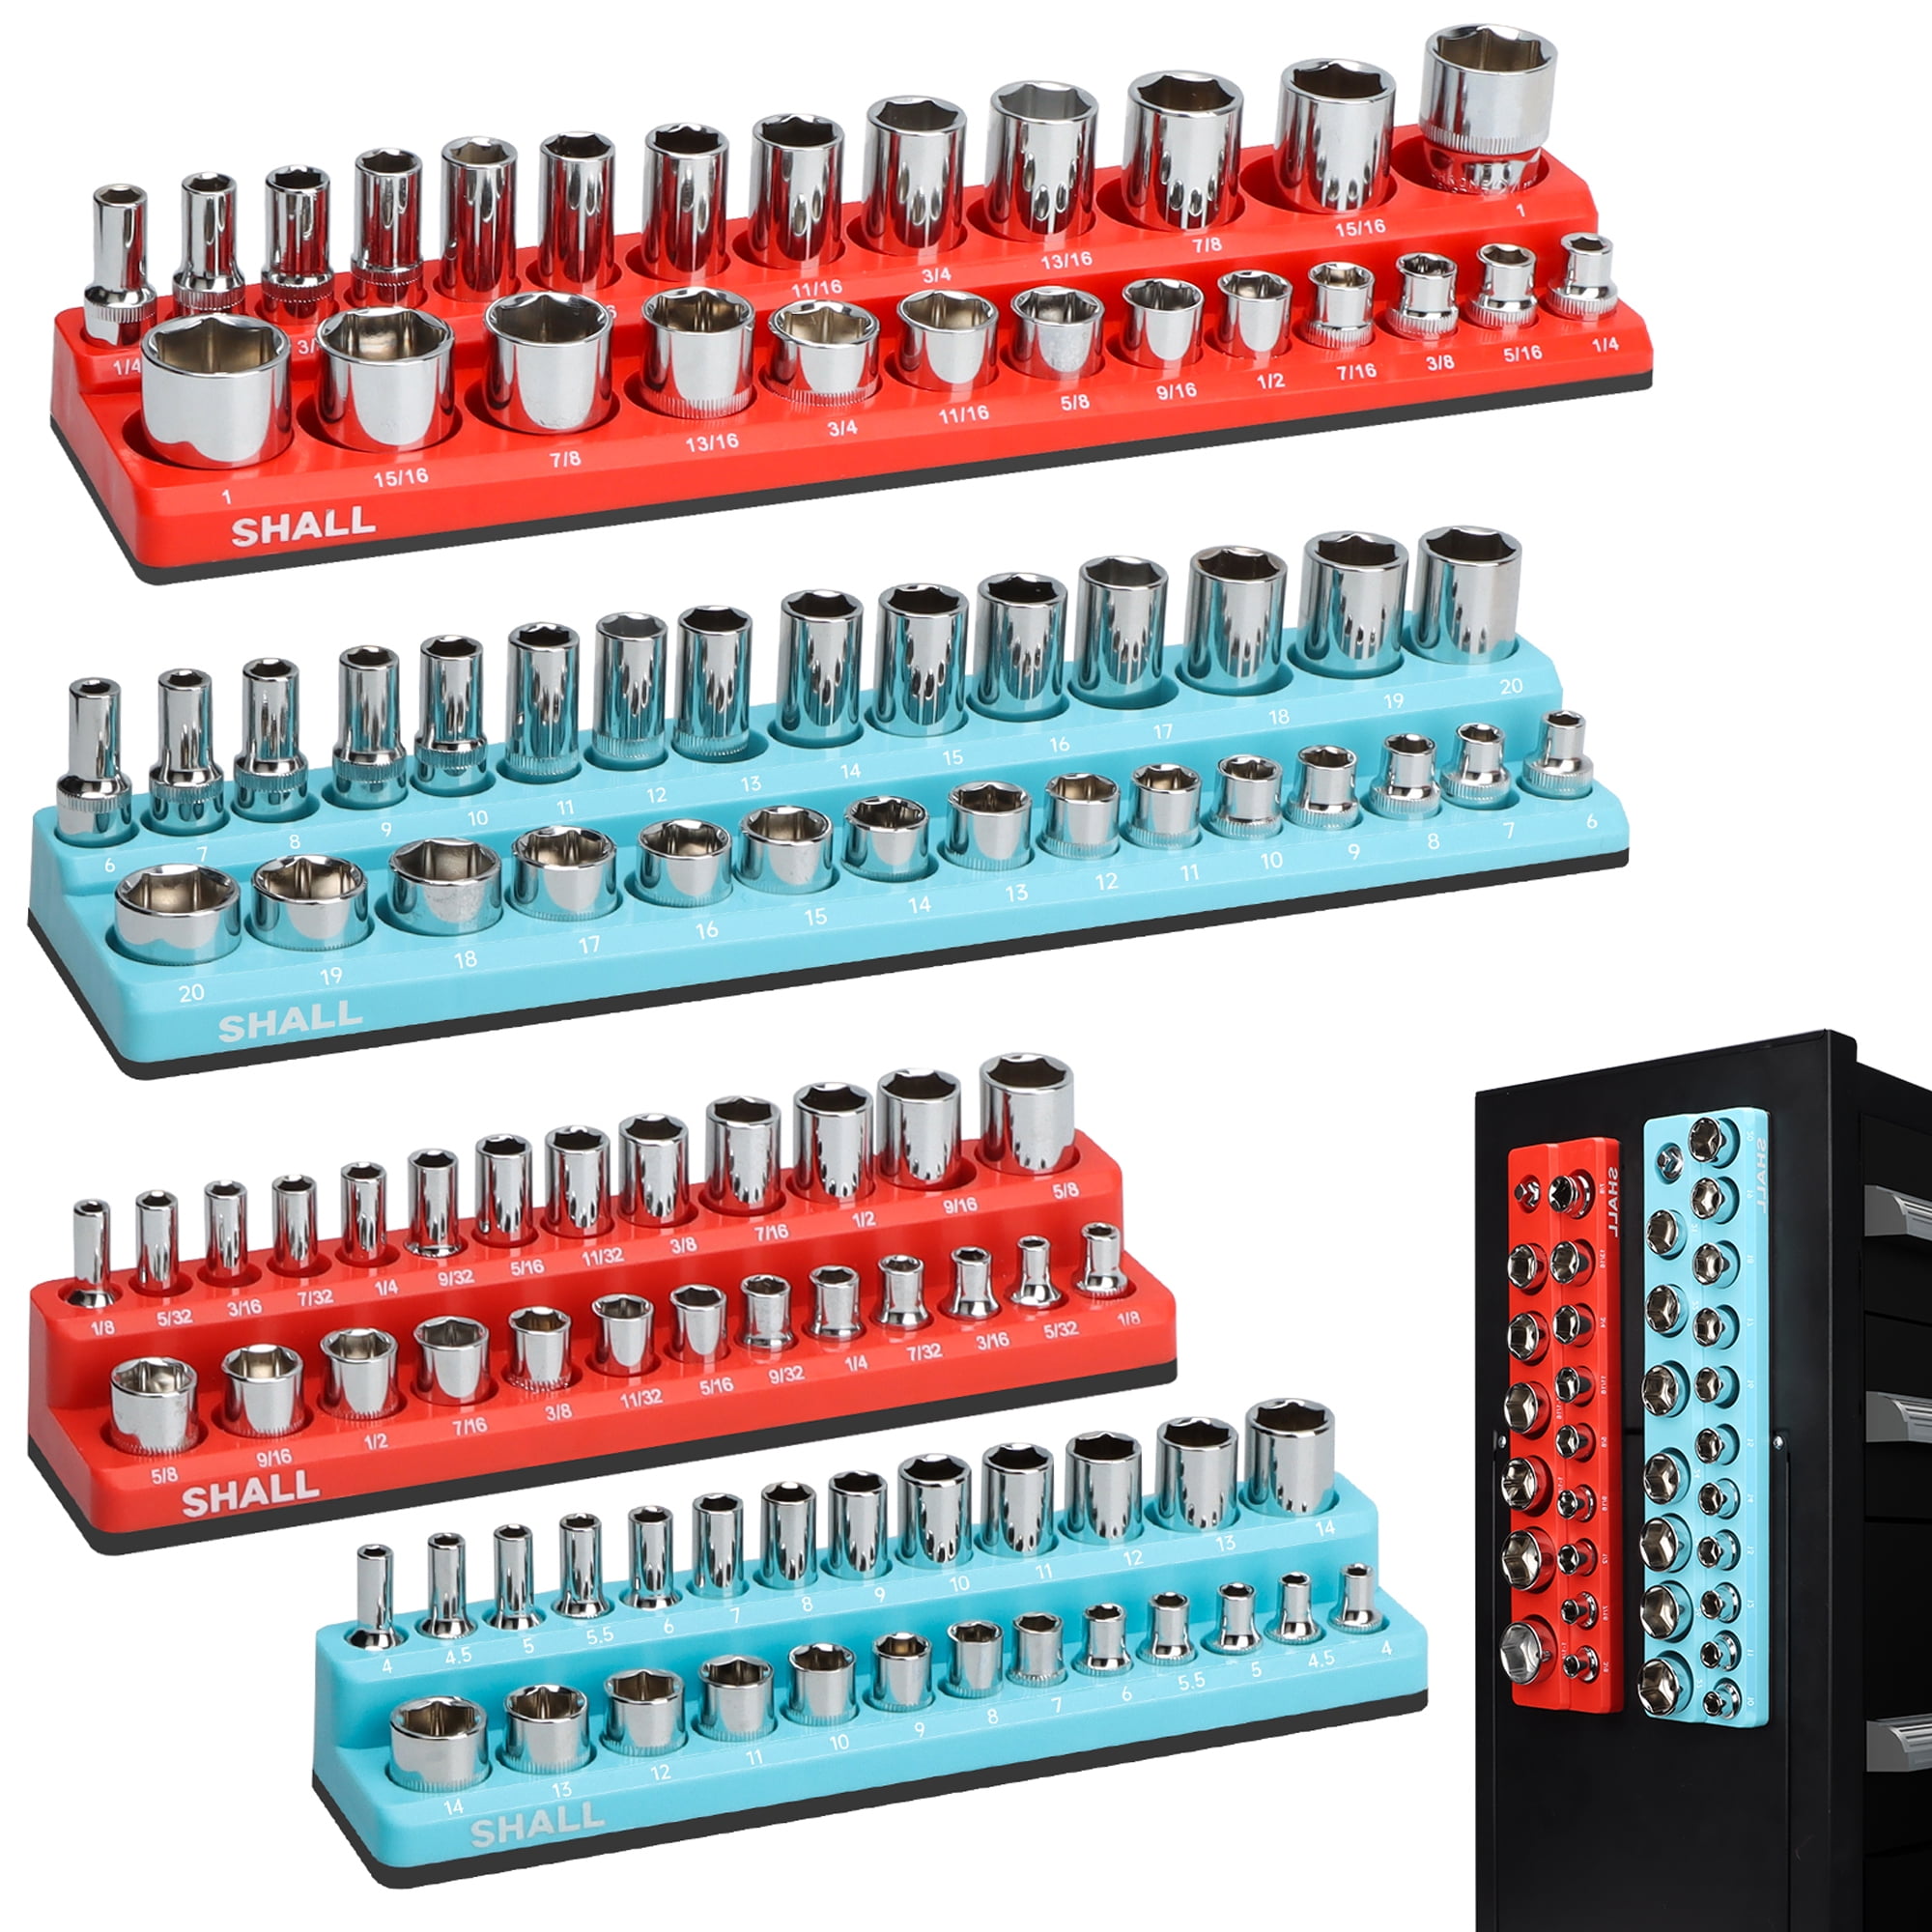 OEMTOOLS 22413 6 Piece SAE and Metric Socket Tray Set (Red and Gray), 1/4,  3/8, and 1/2 Drive Socket Holders Organizers for Tool Box 